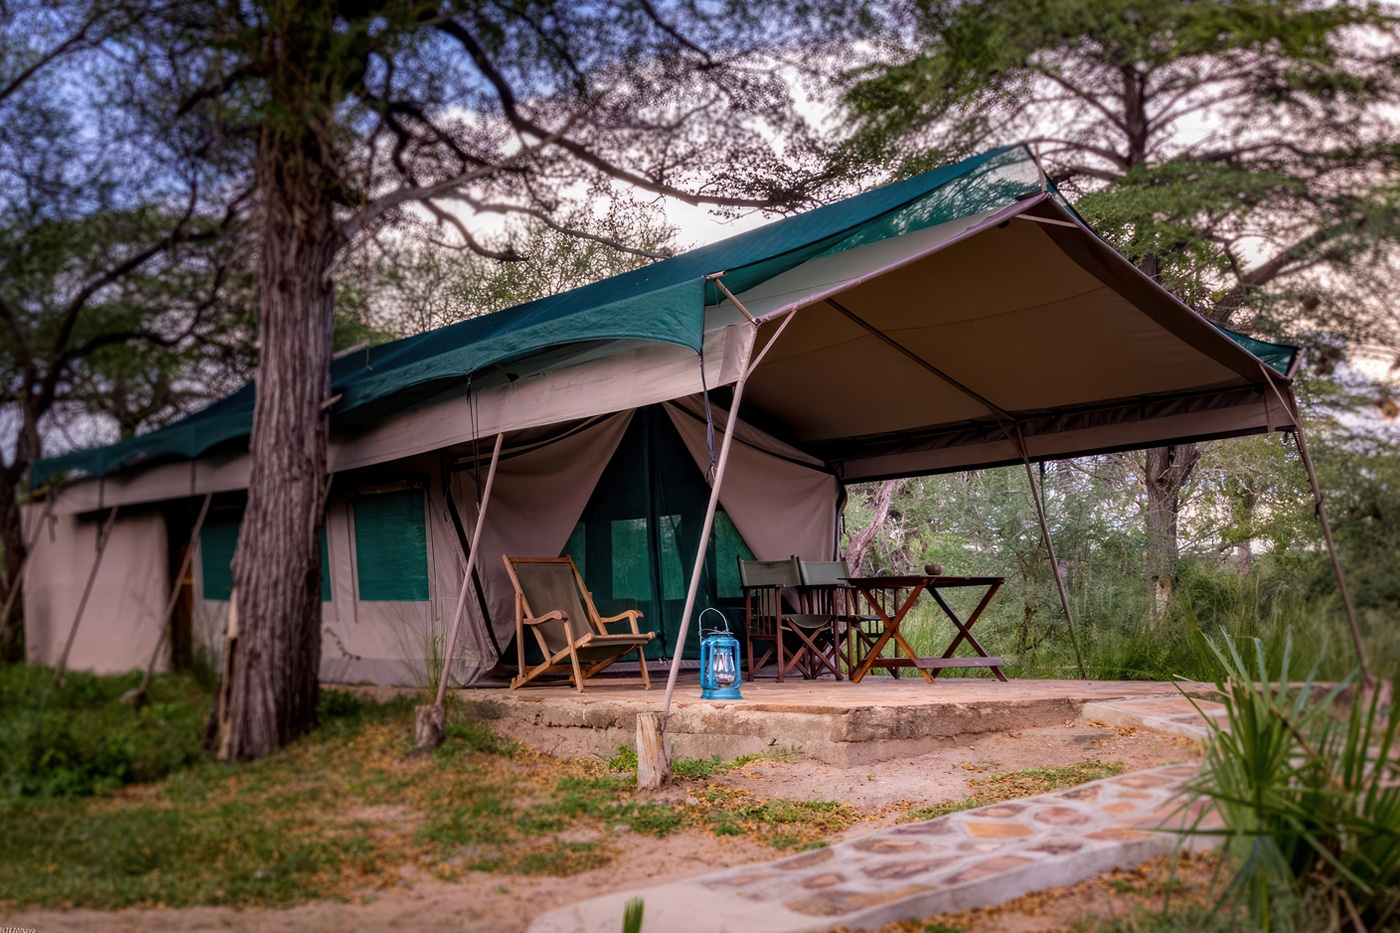 Lake manze tented camp - accommodation in nyerere national park – easy travel tanzania